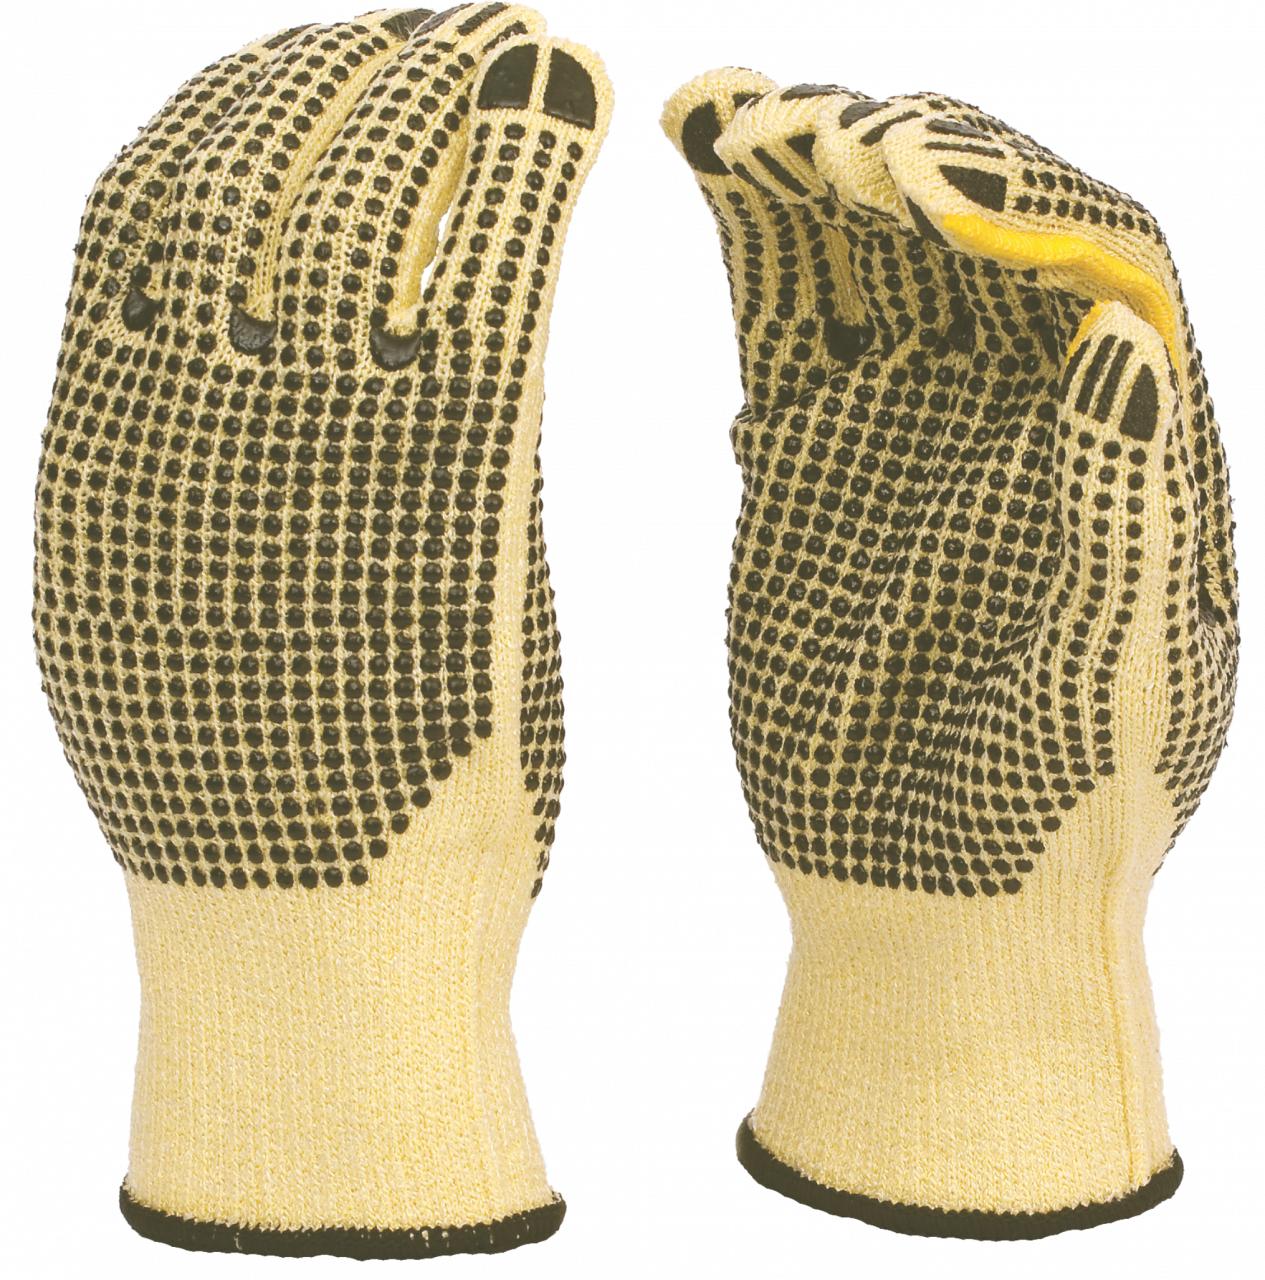 Cotton Protective Gloves Supergrip Double Dotted